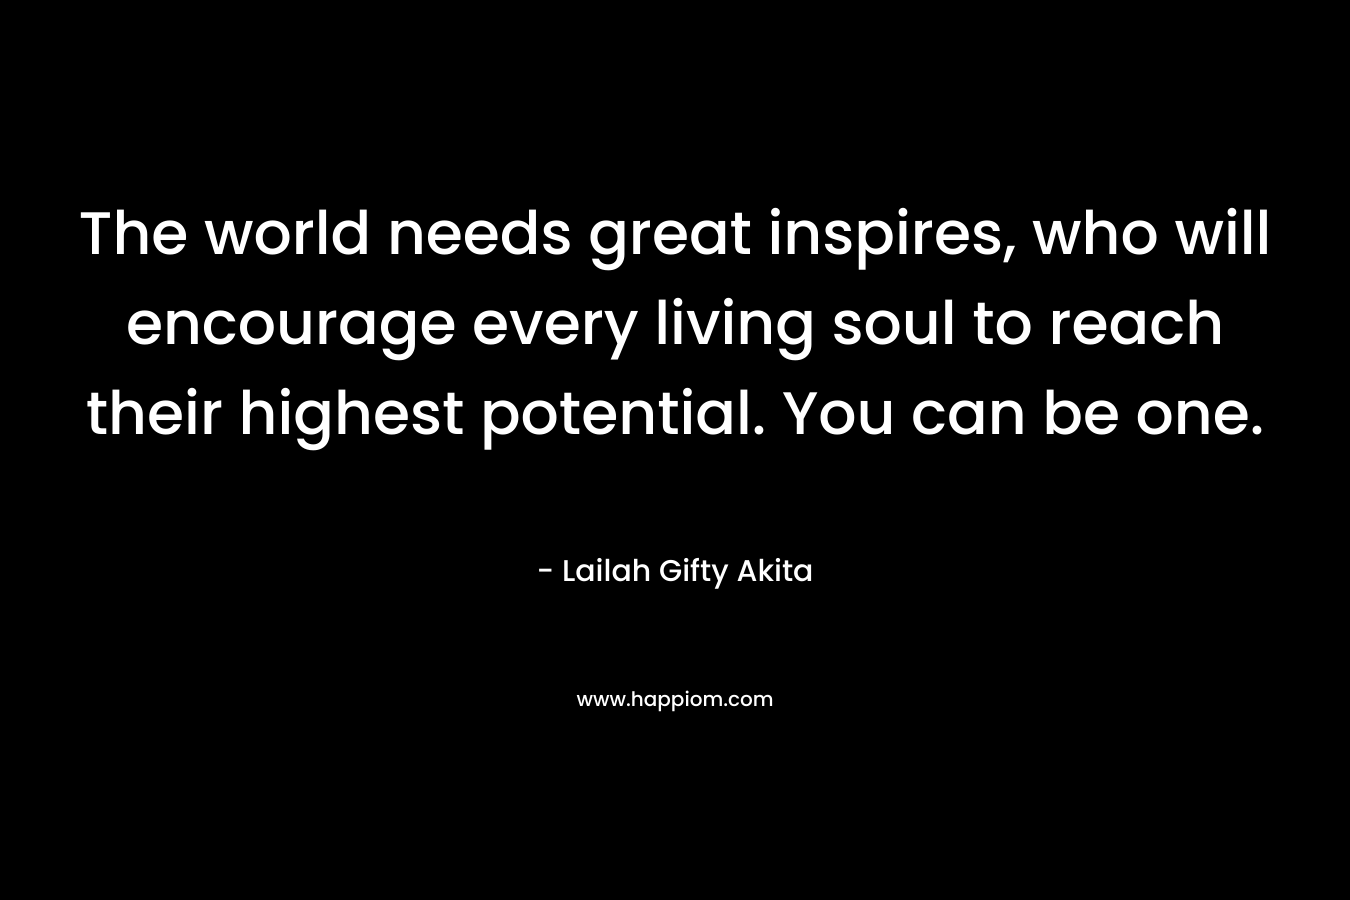 The world needs great inspires, who will encourage every living soul to reach their highest potential. You can be one.